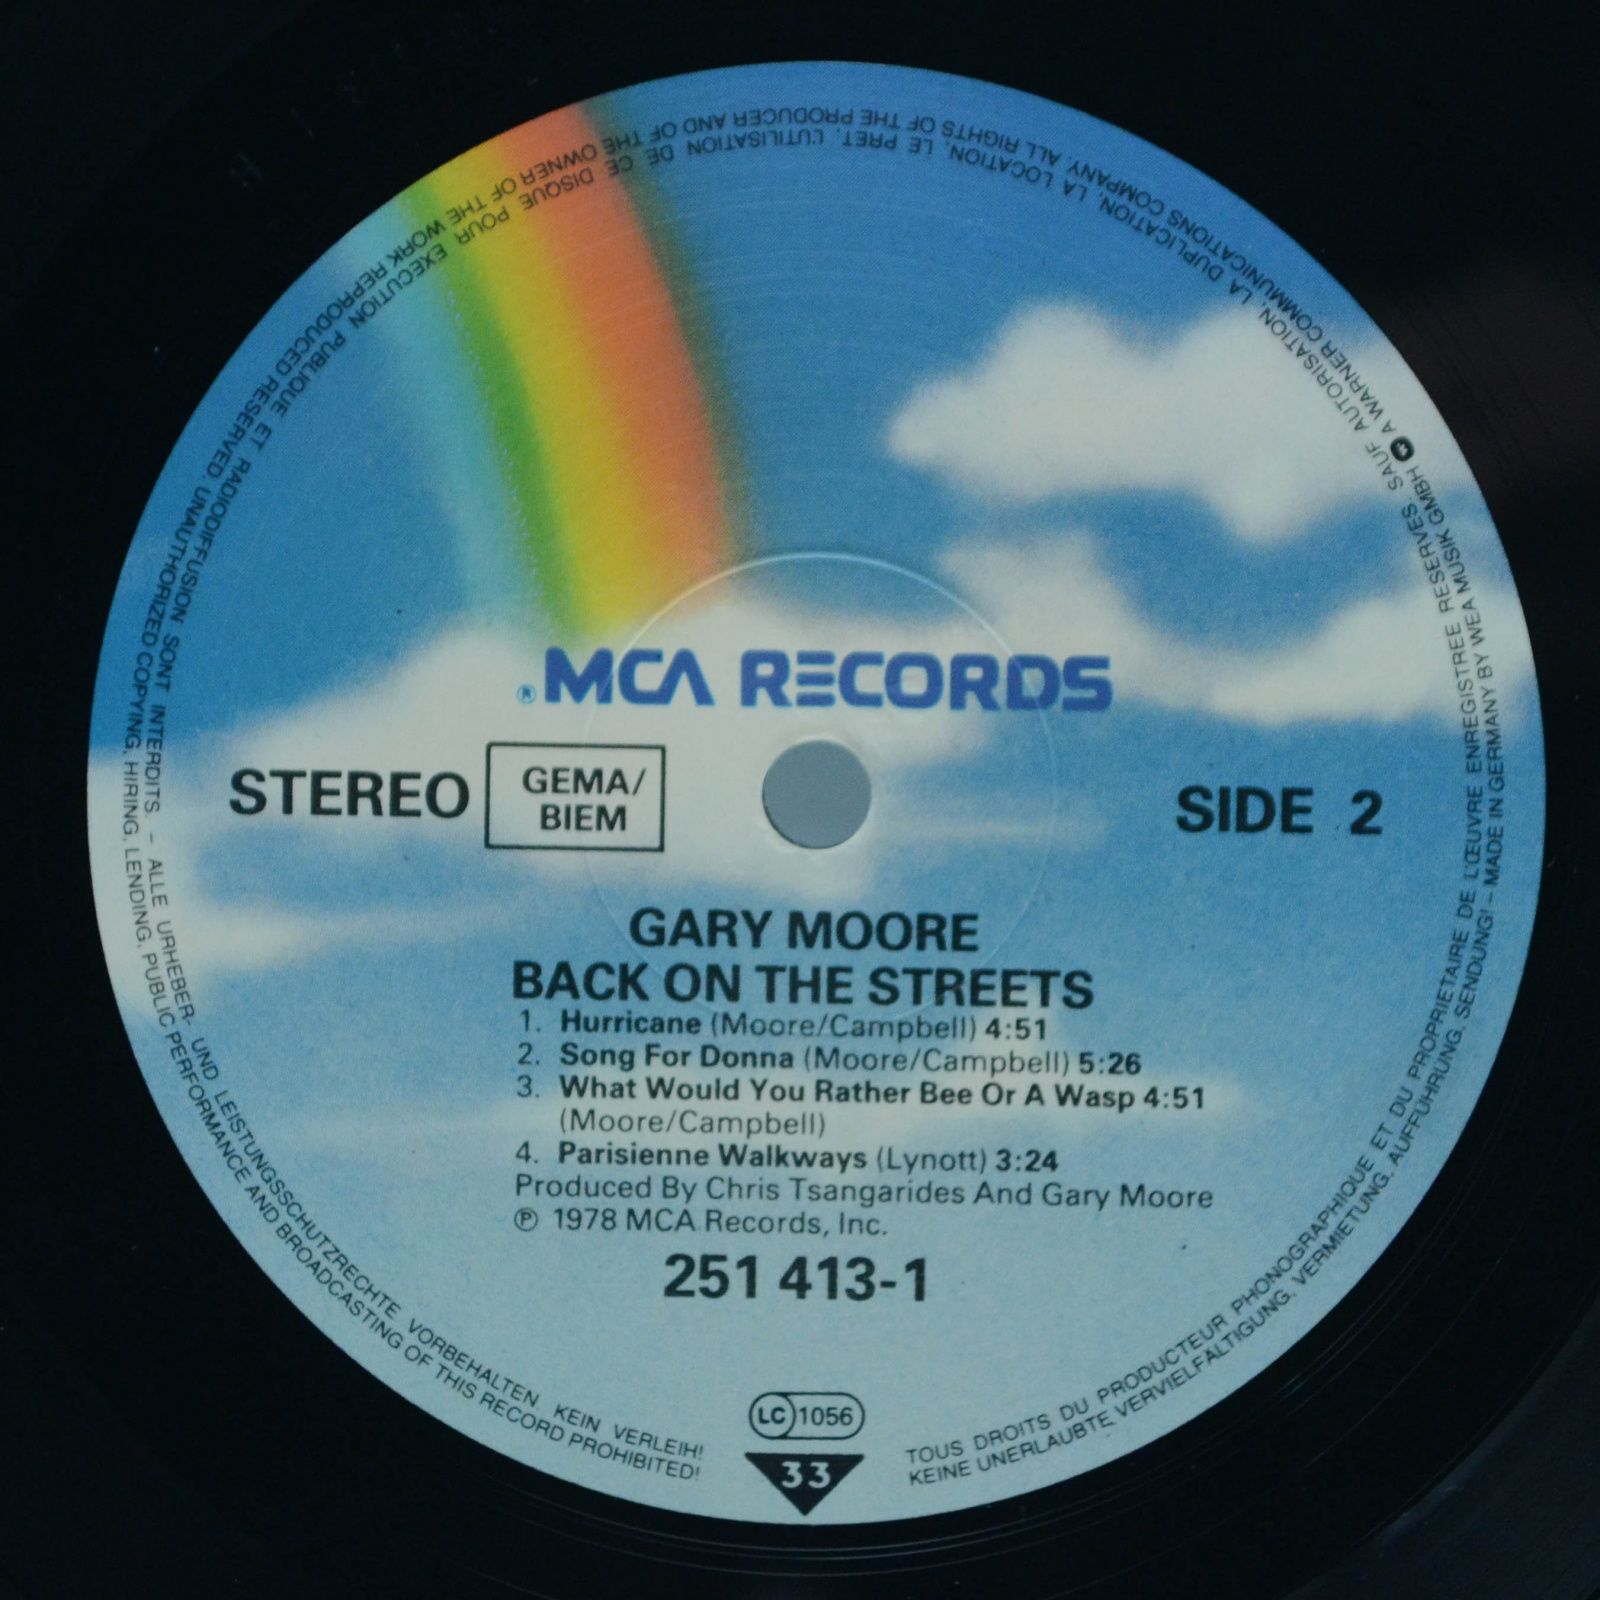 Gary Moore — Back On The Streets, 1985